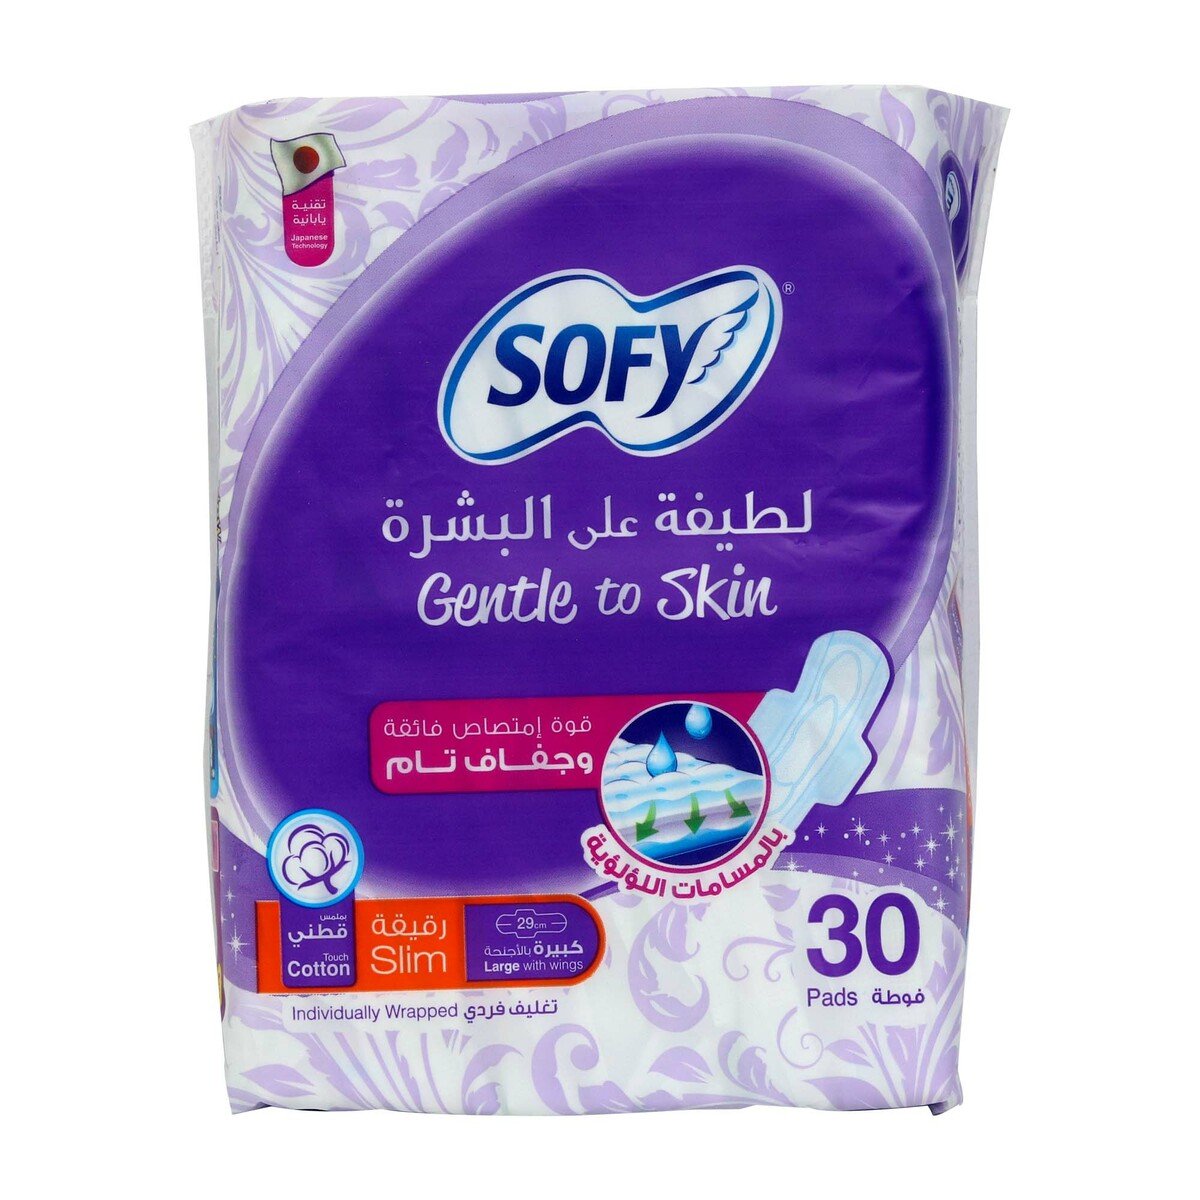 Sofy Slim Pads Large With Wings Gentle To Skin Size 29cm 30pcs